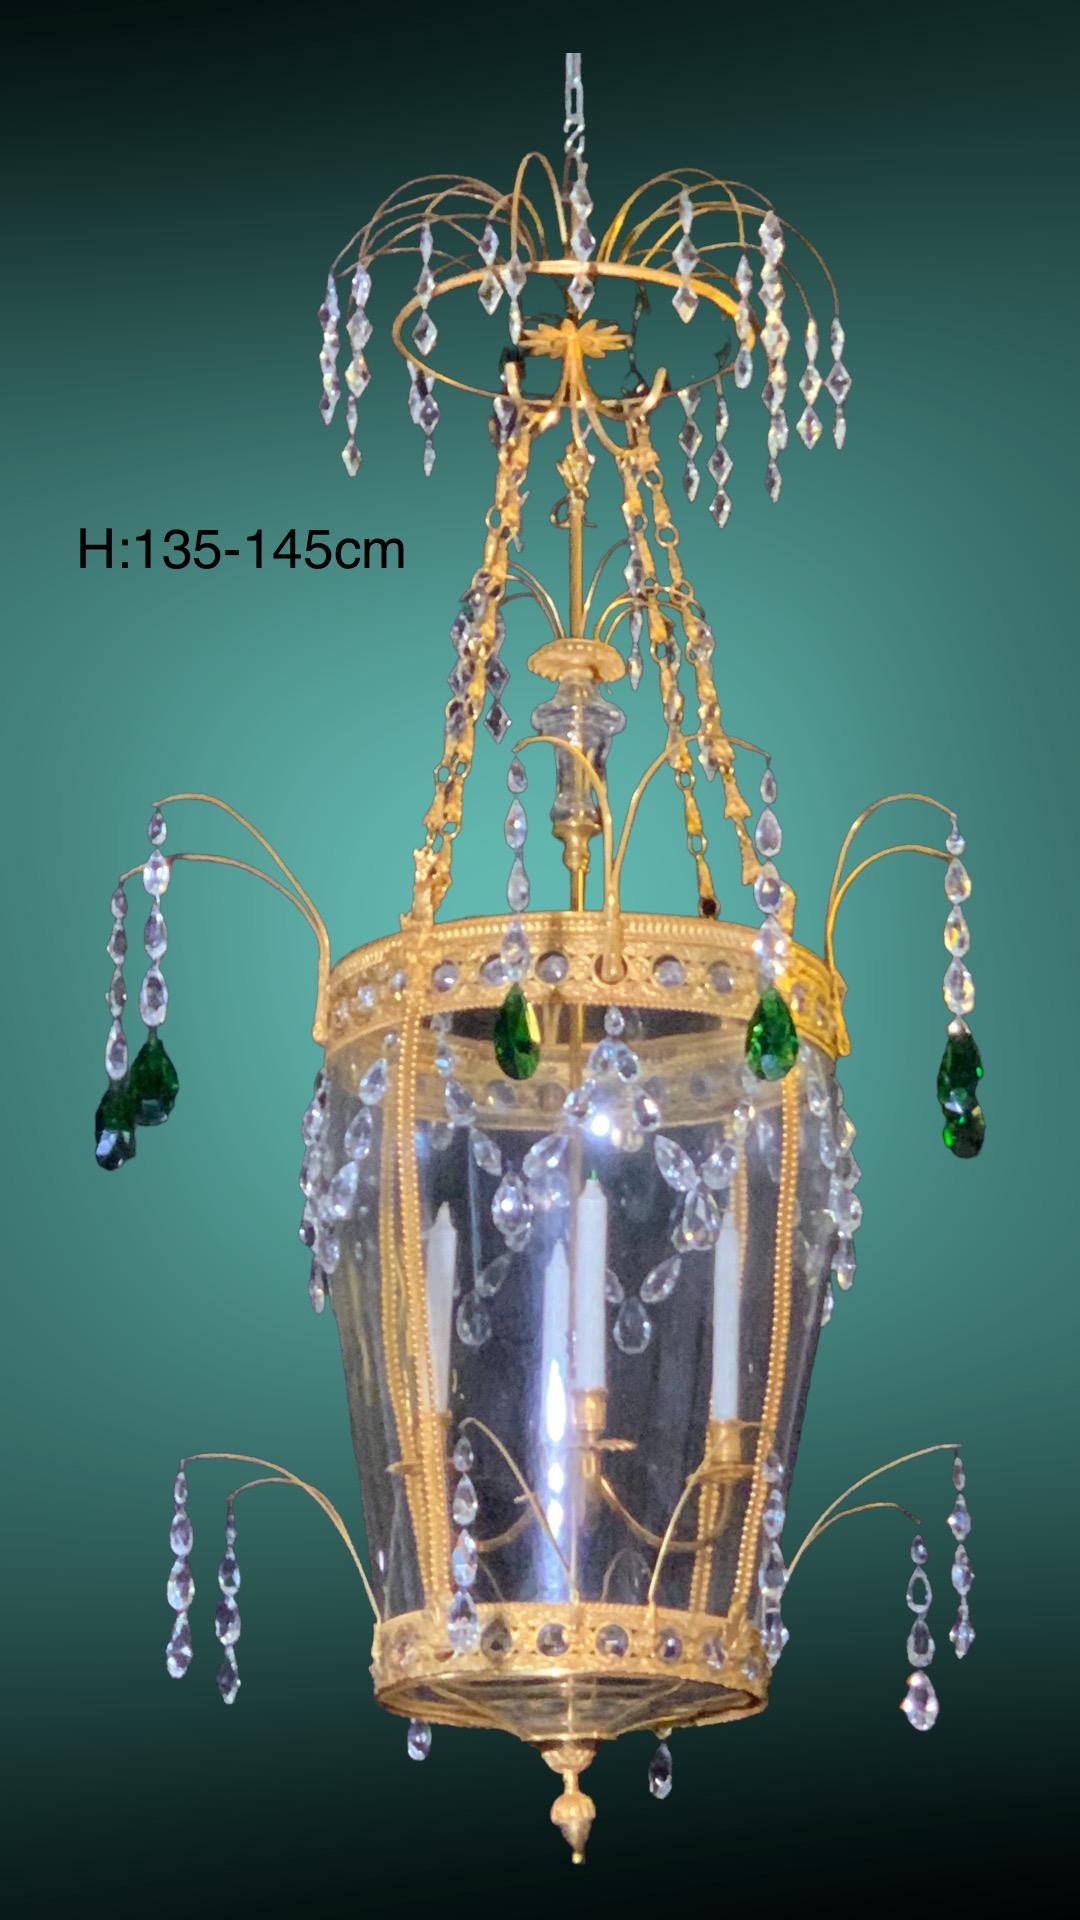 This very large gorgeous lantern (or chandelier too)  is Inspired by  the great Lantern in  the Throne Room in Pavlovsk Palace. 
Rich Fire gilt and agate polishied bronze. 
Crystal and emerald glass
5  lights,
The high can be adapted between 125 and